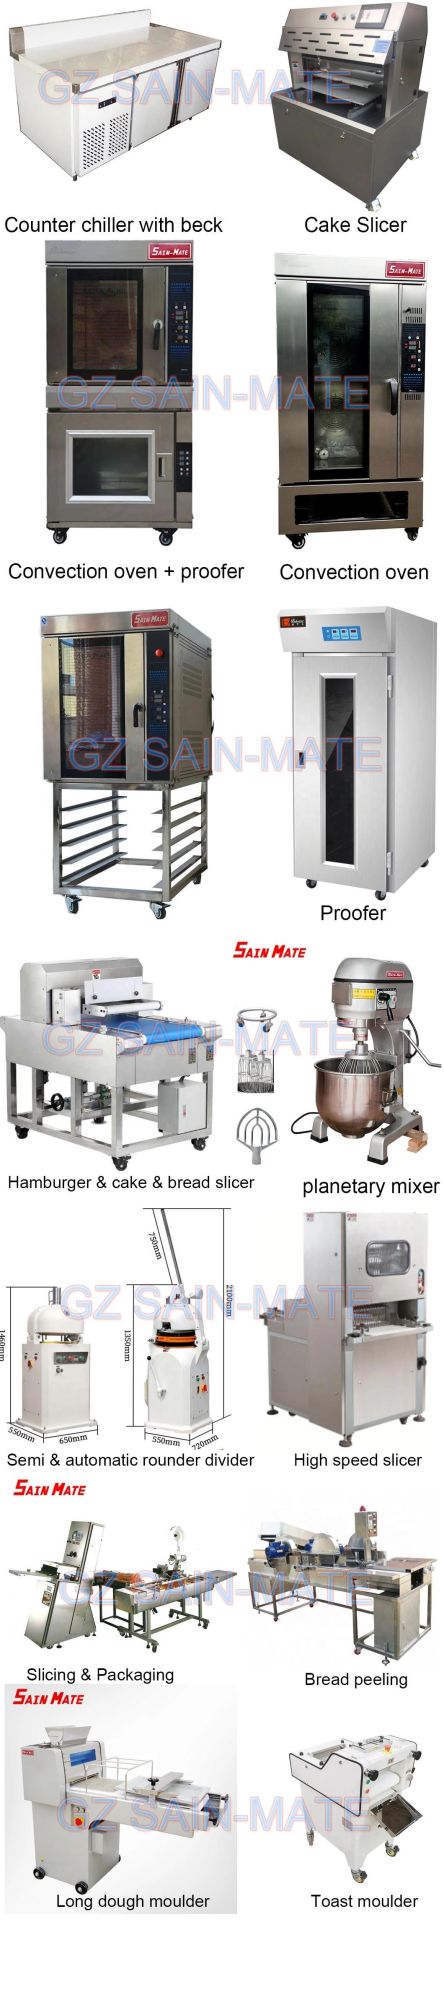 Bakestar 125kg High Quality Large Capacity Double Action Double Speed Dough Mixer